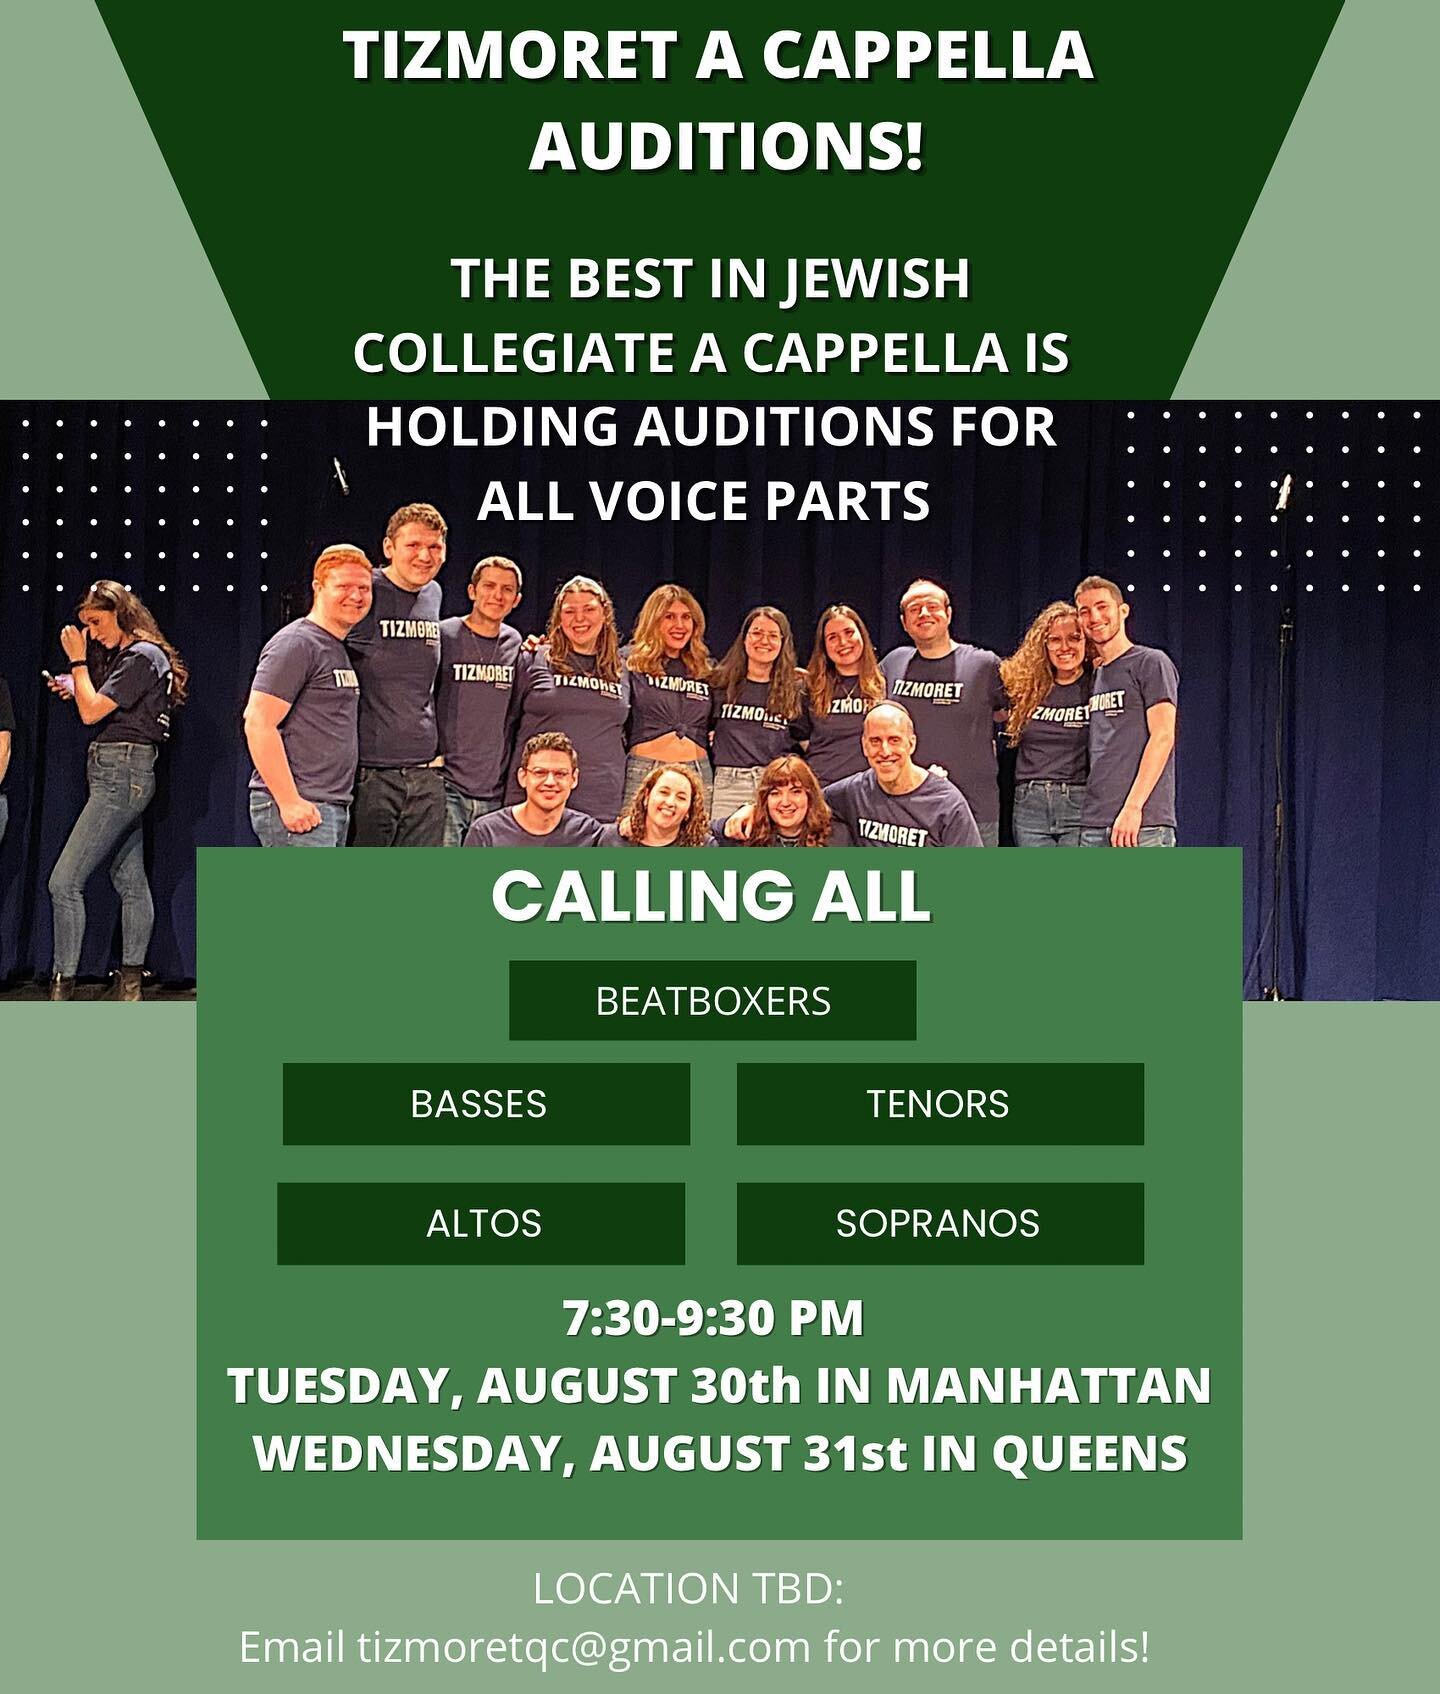 If you&rsquo;ve always wanted to be in an acapella group, now is your chance!! Click the link in our bio to sign up to audition!!